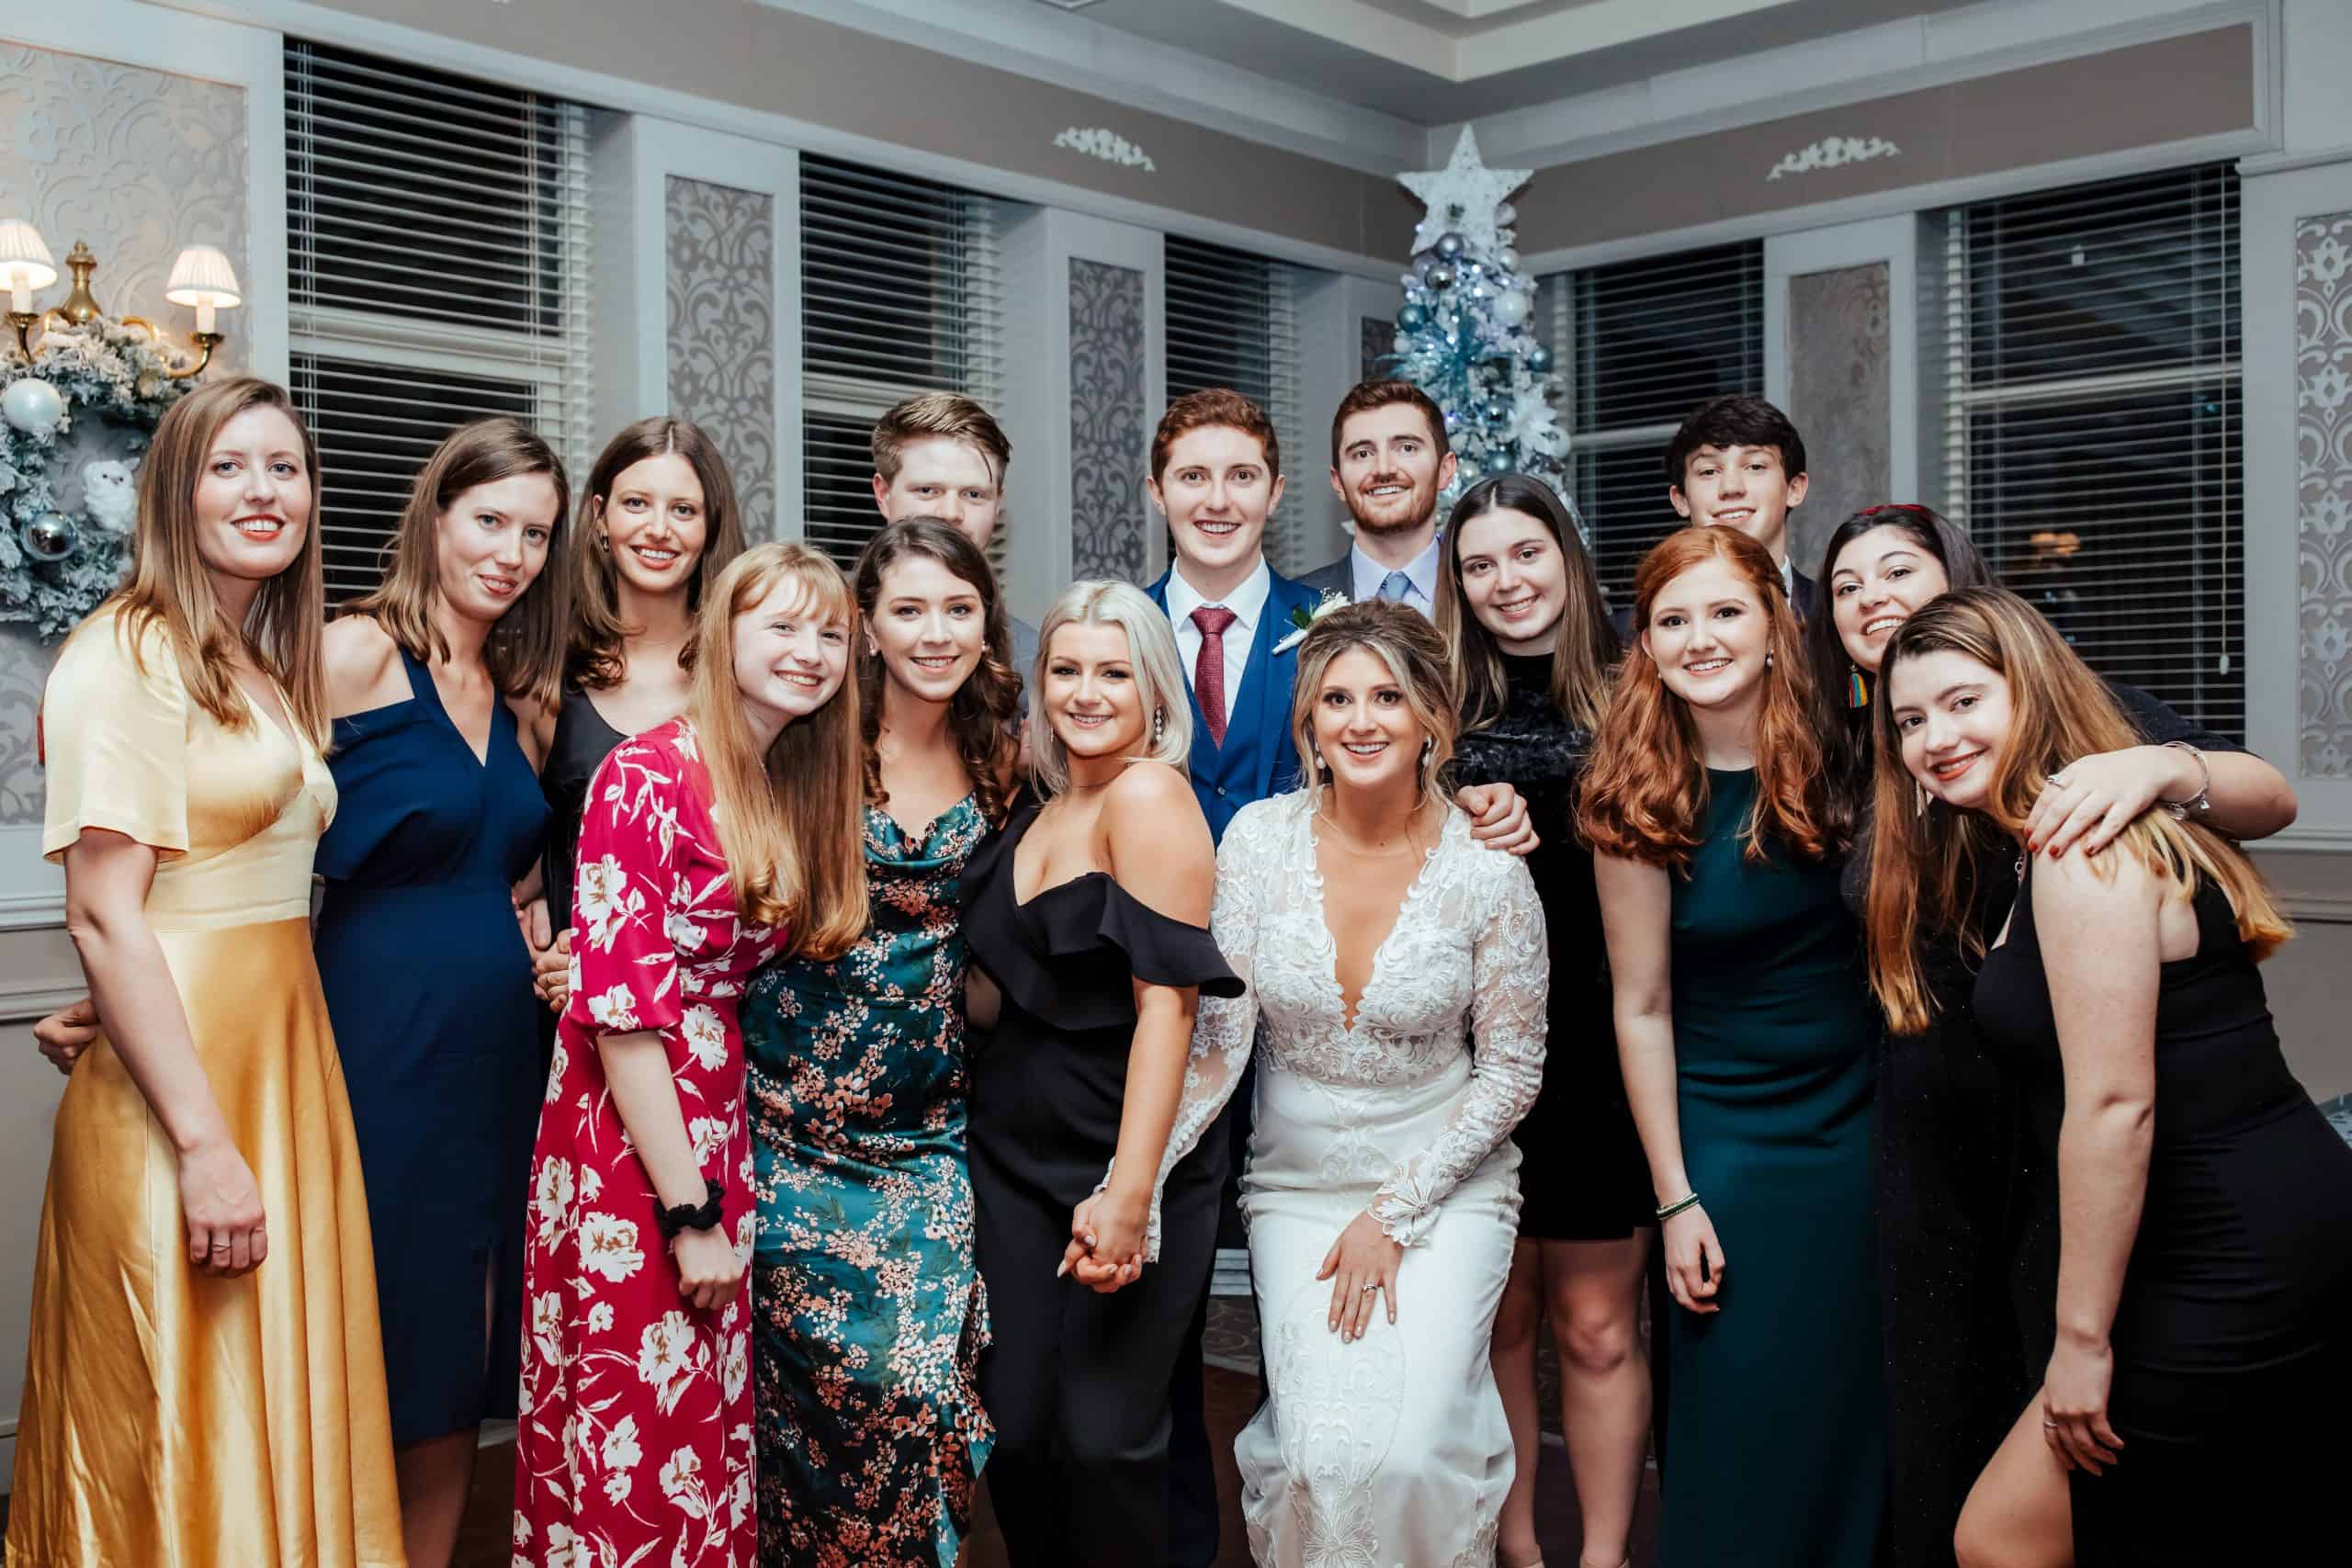 group photo with friends at christmas wedding